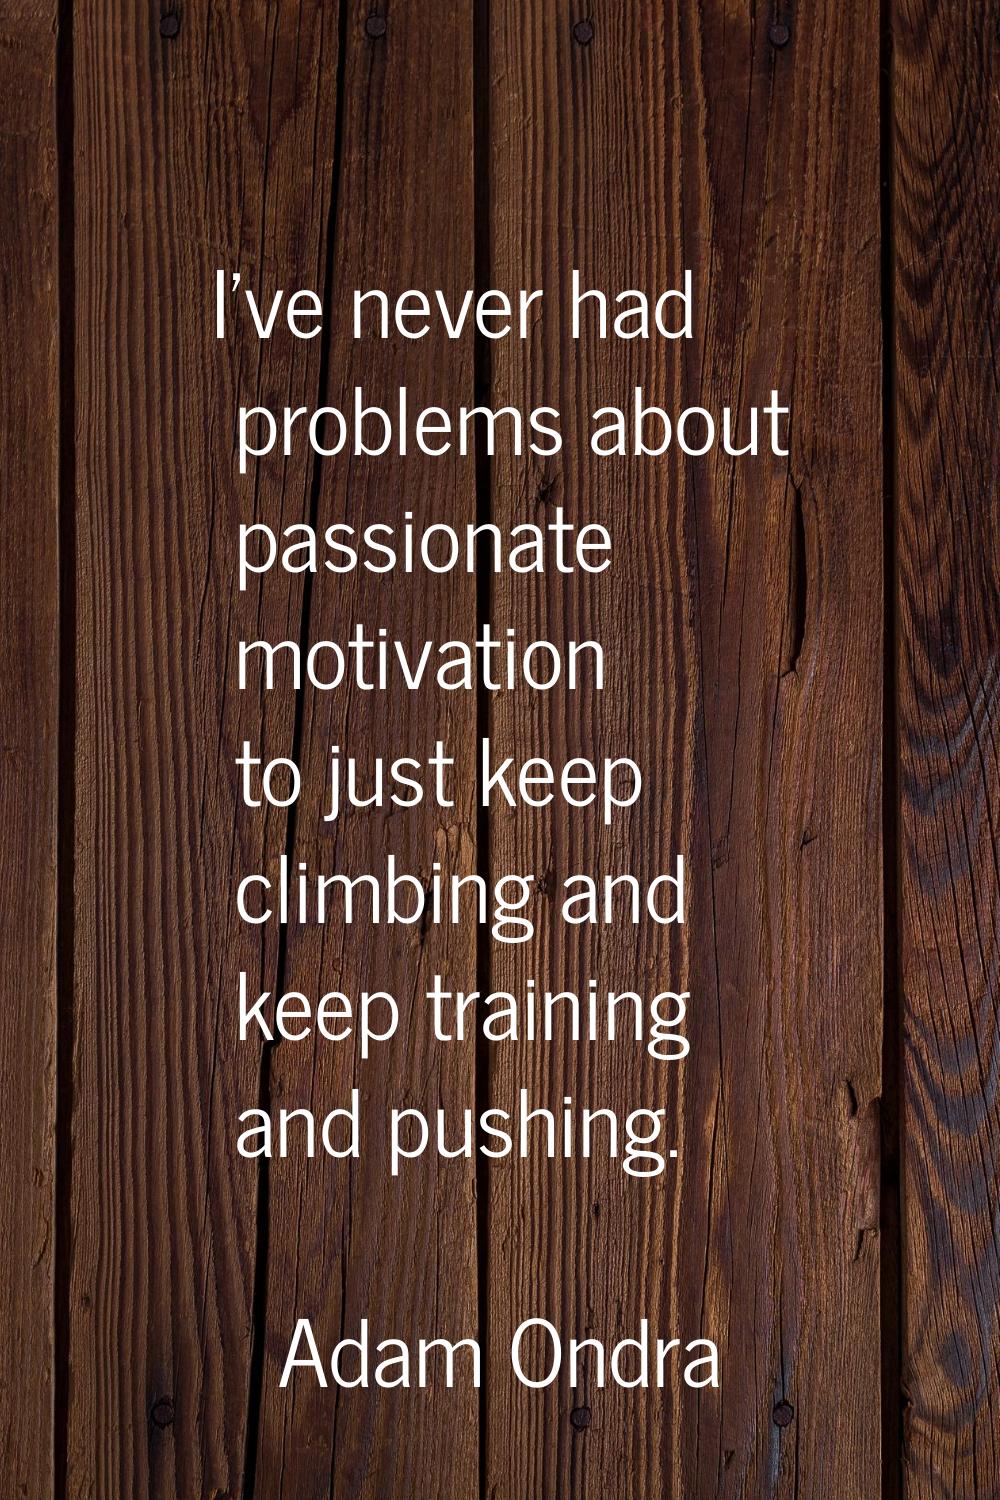 I've never had problems about passionate motivation to just keep climbing and keep training and pus